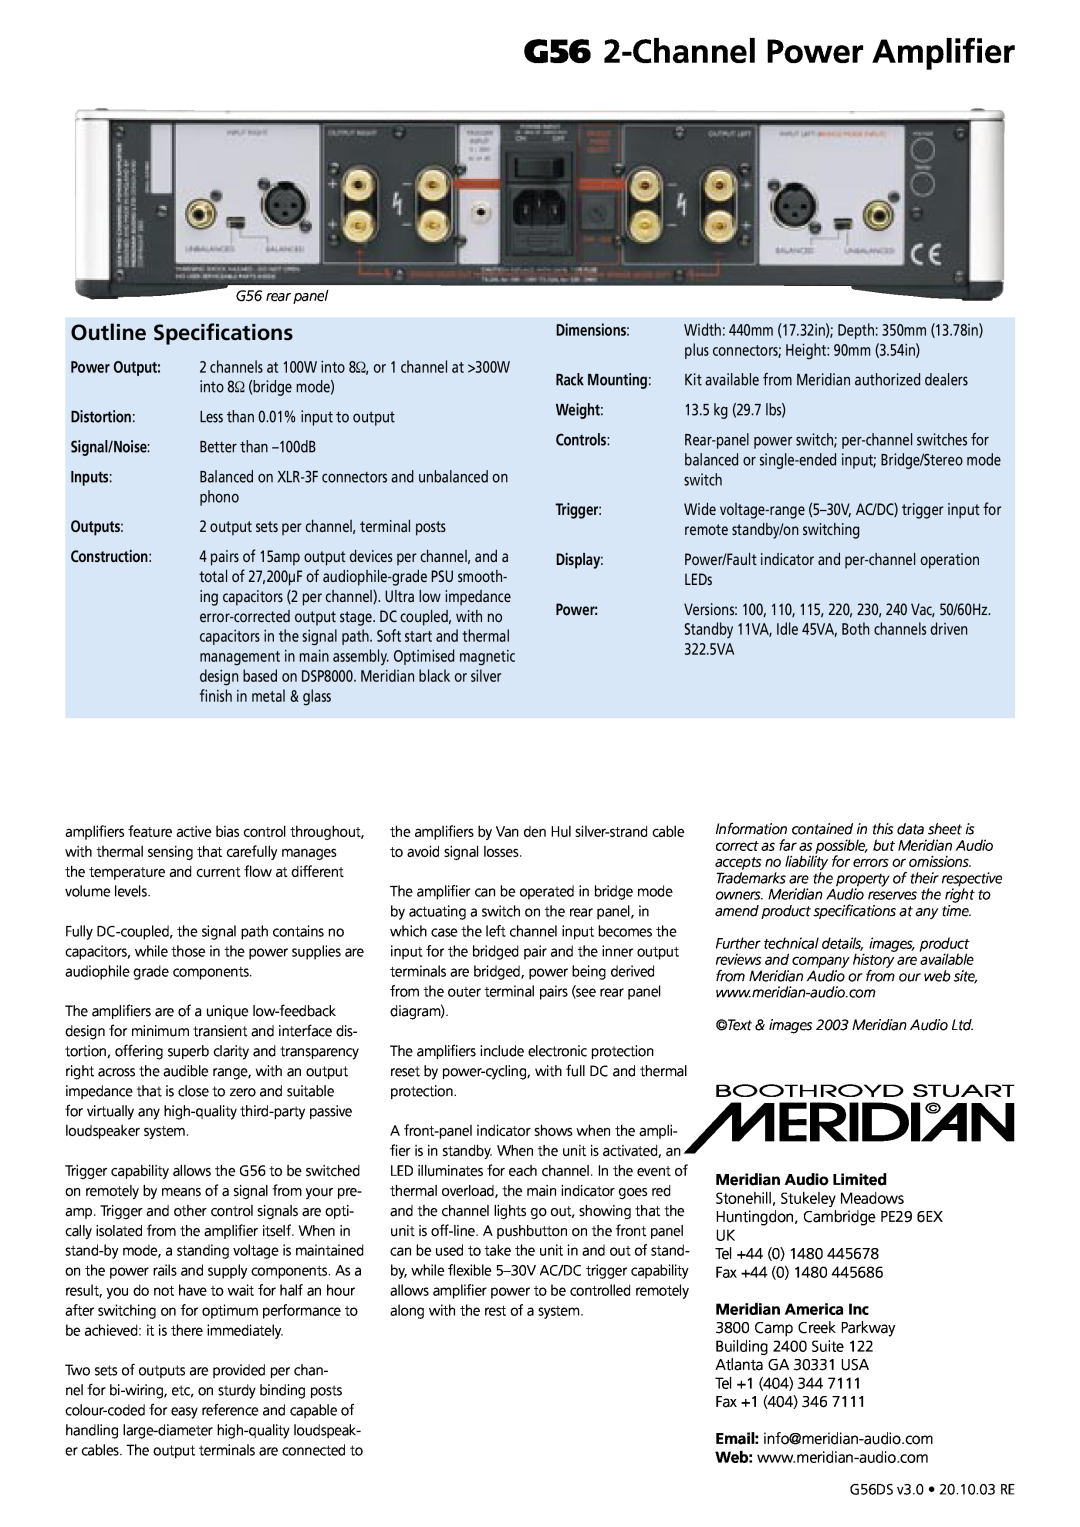 Meridian Audio manual Outline Specifications, G56 2-ChannelPower Amplifier 